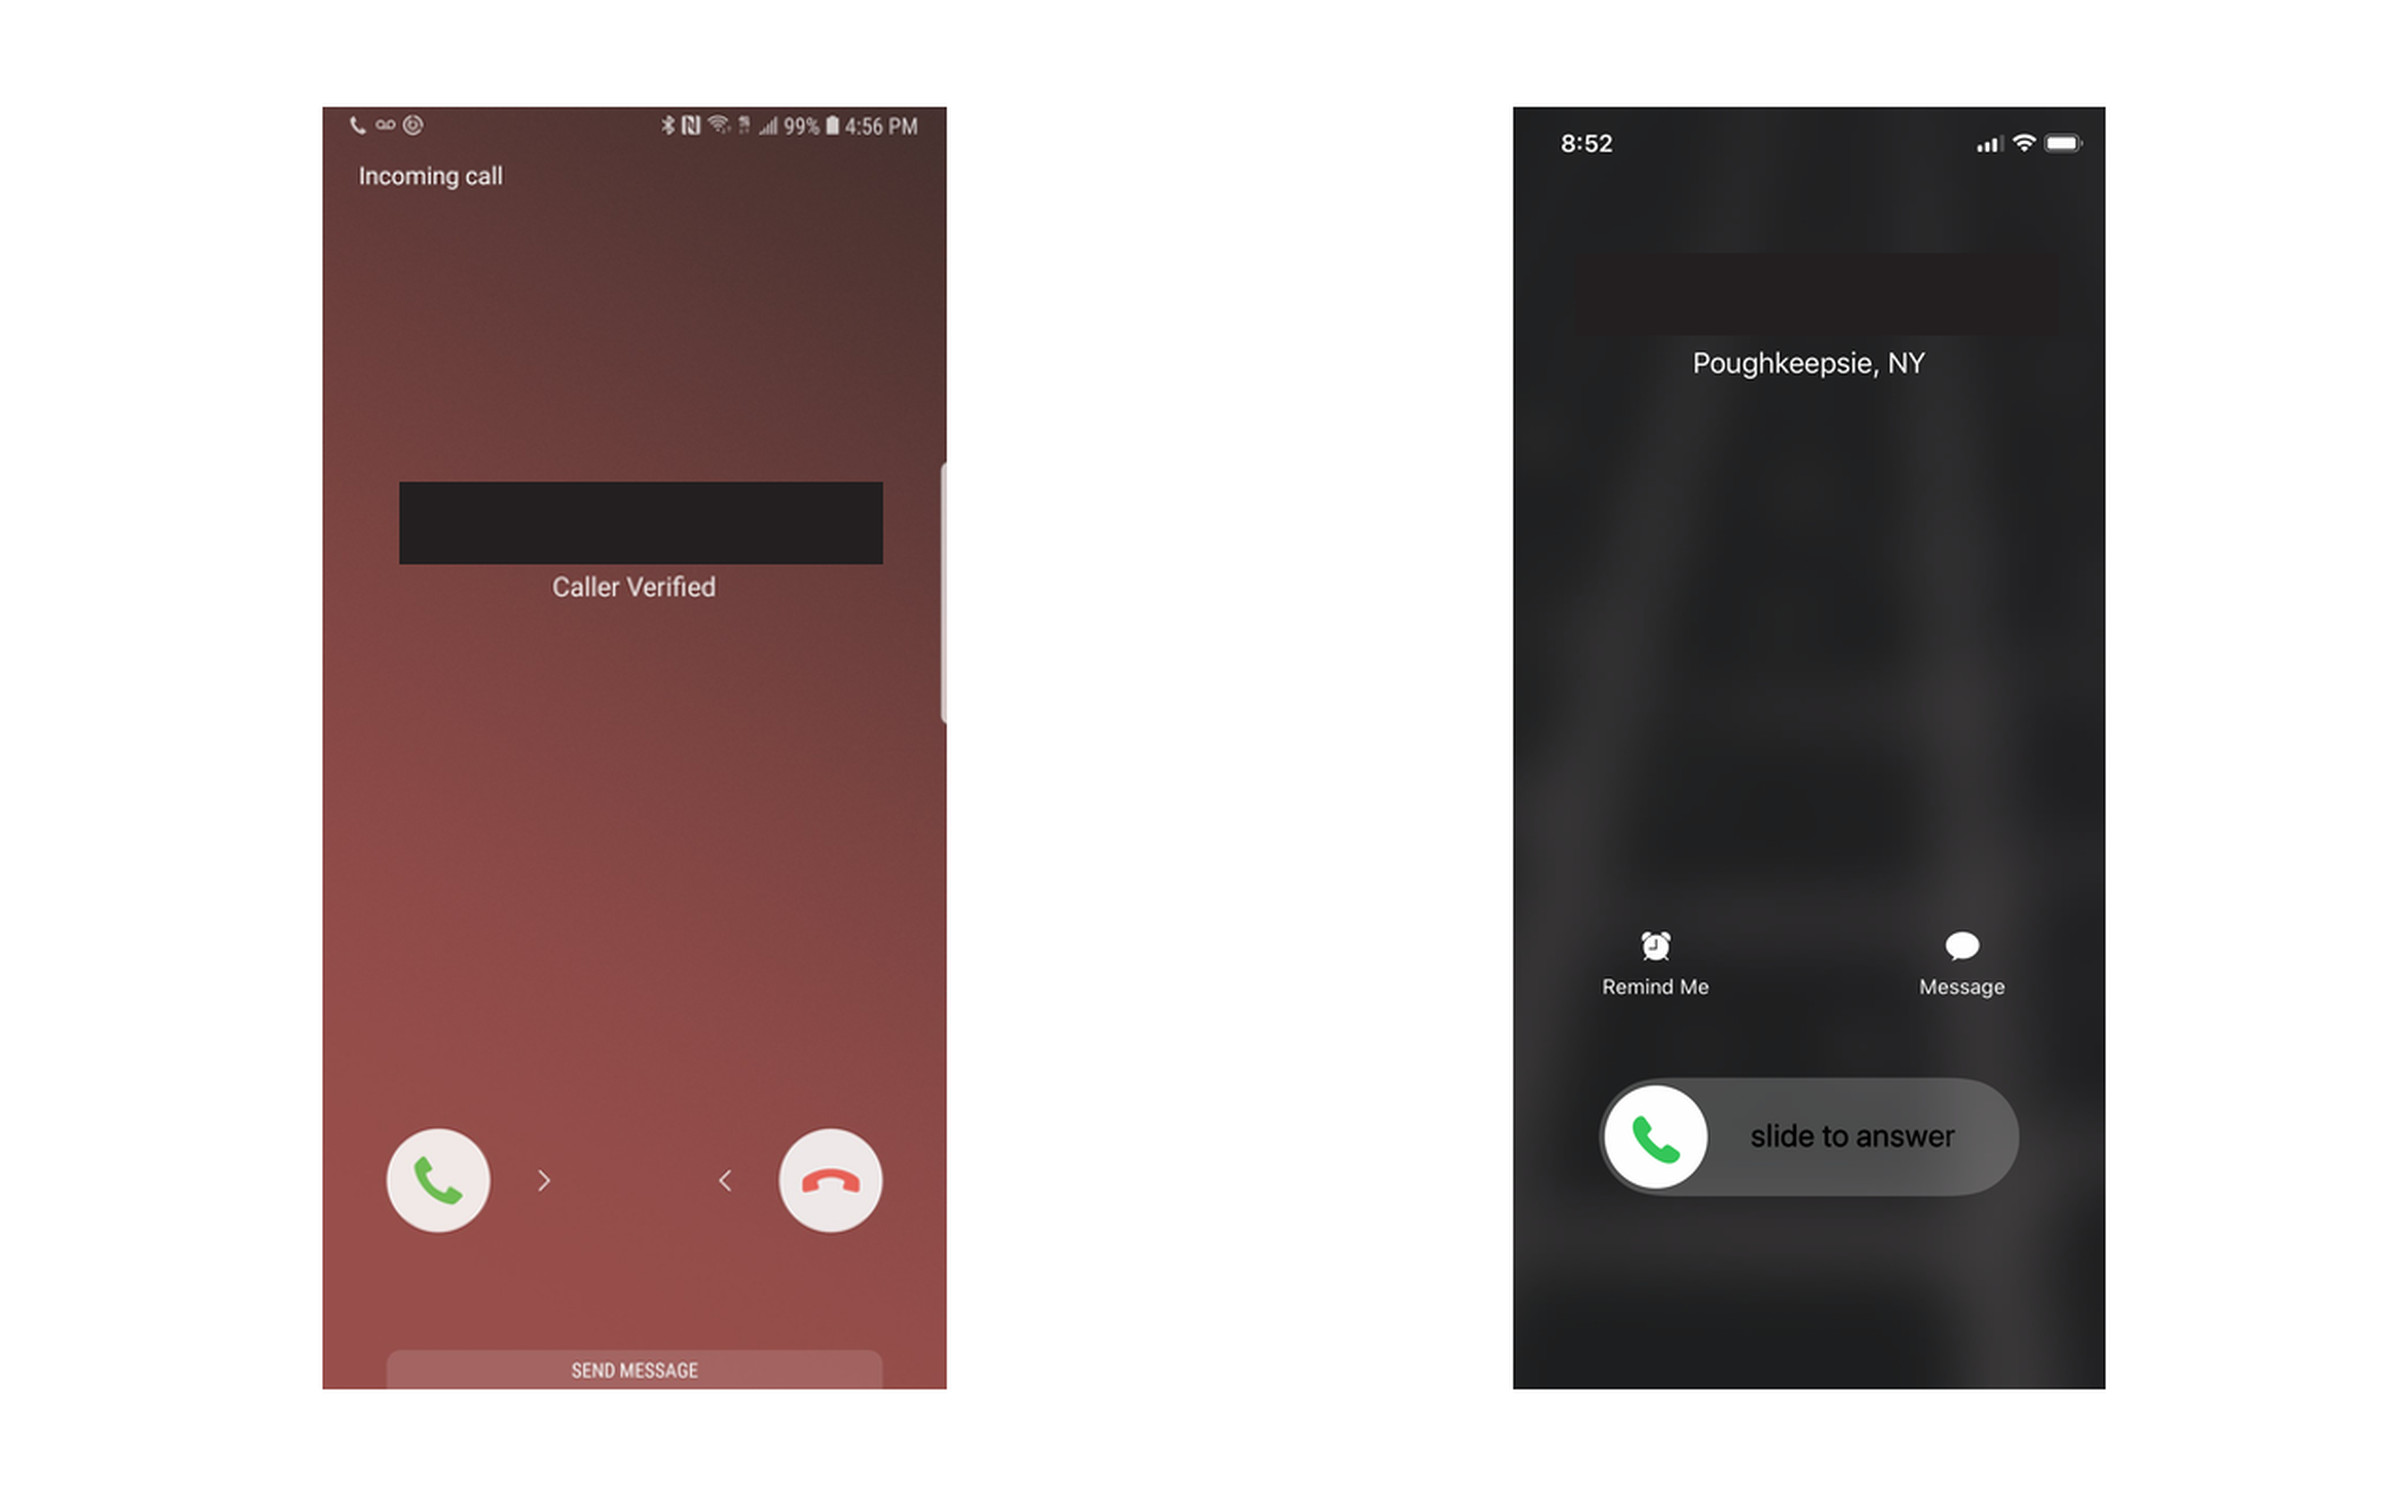 Left, a verified STIR/SHAKEN call on Android. Right, iOS.